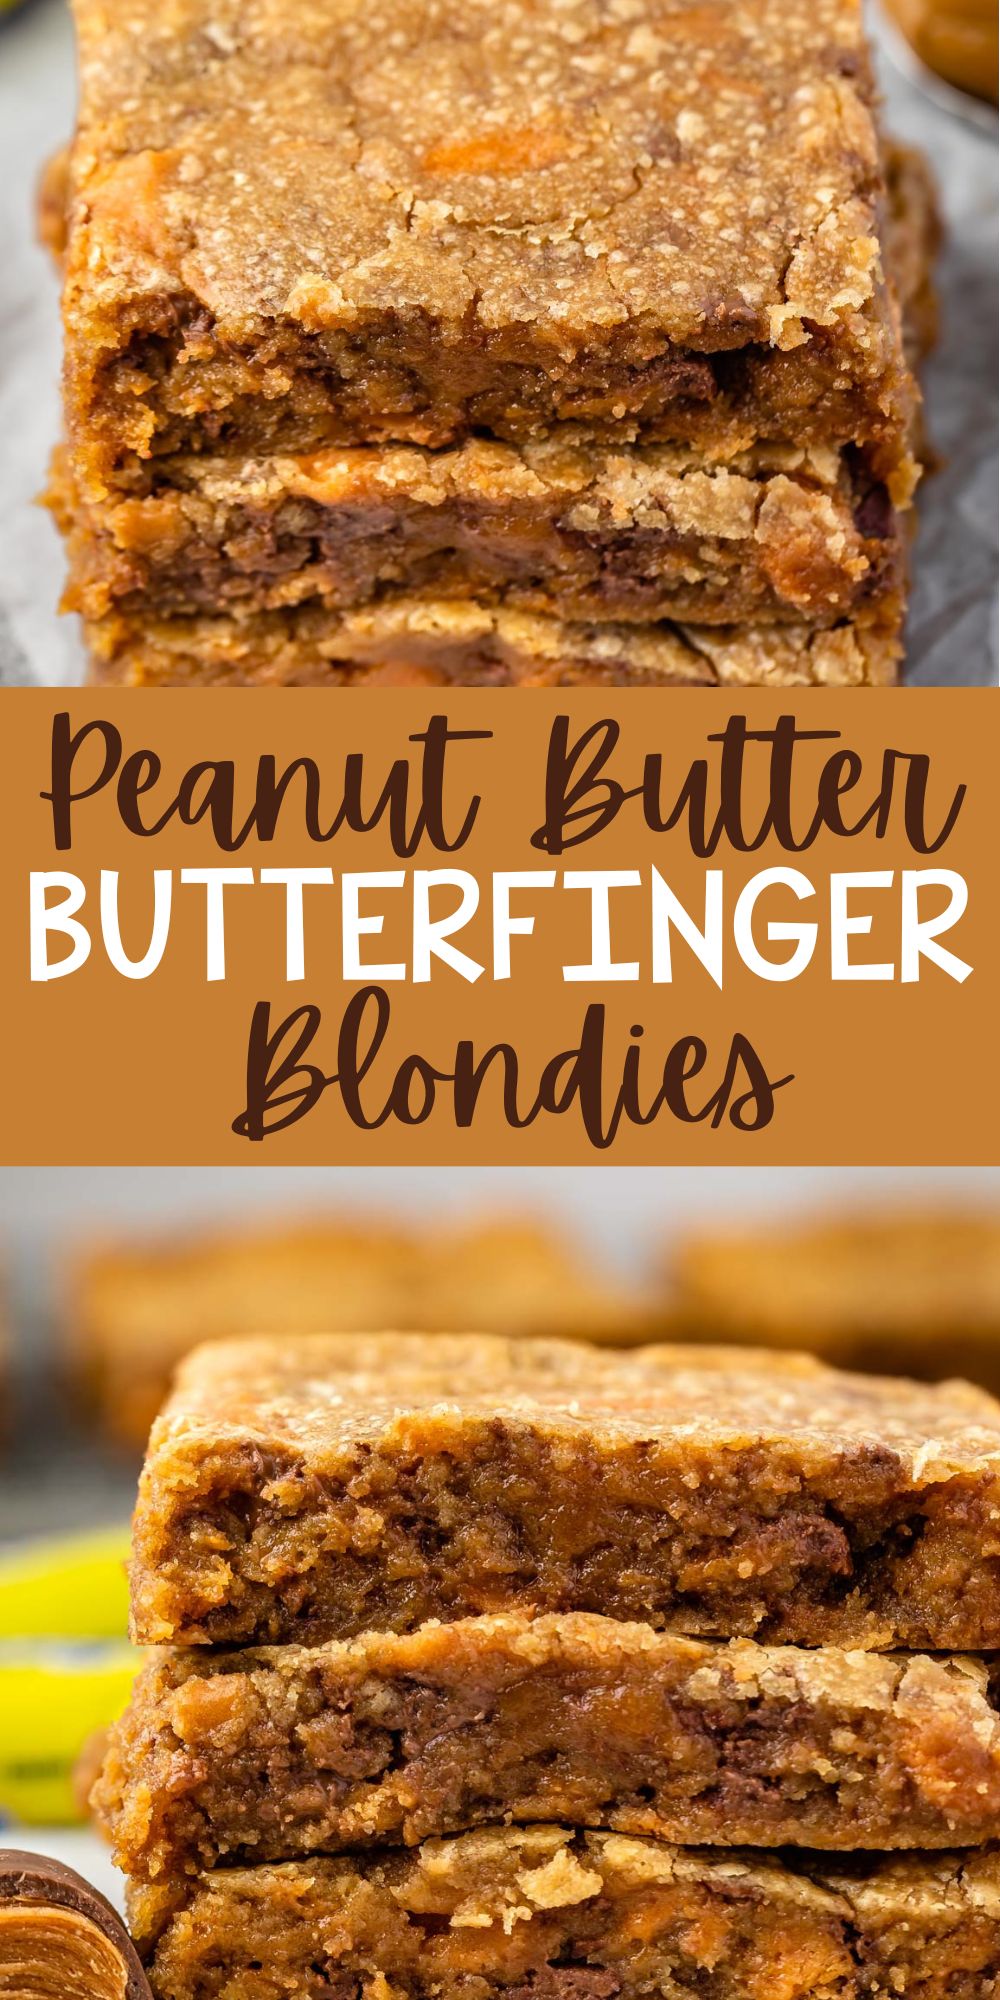 two photos stacked blondies with butterfinger in the back with words on the image.